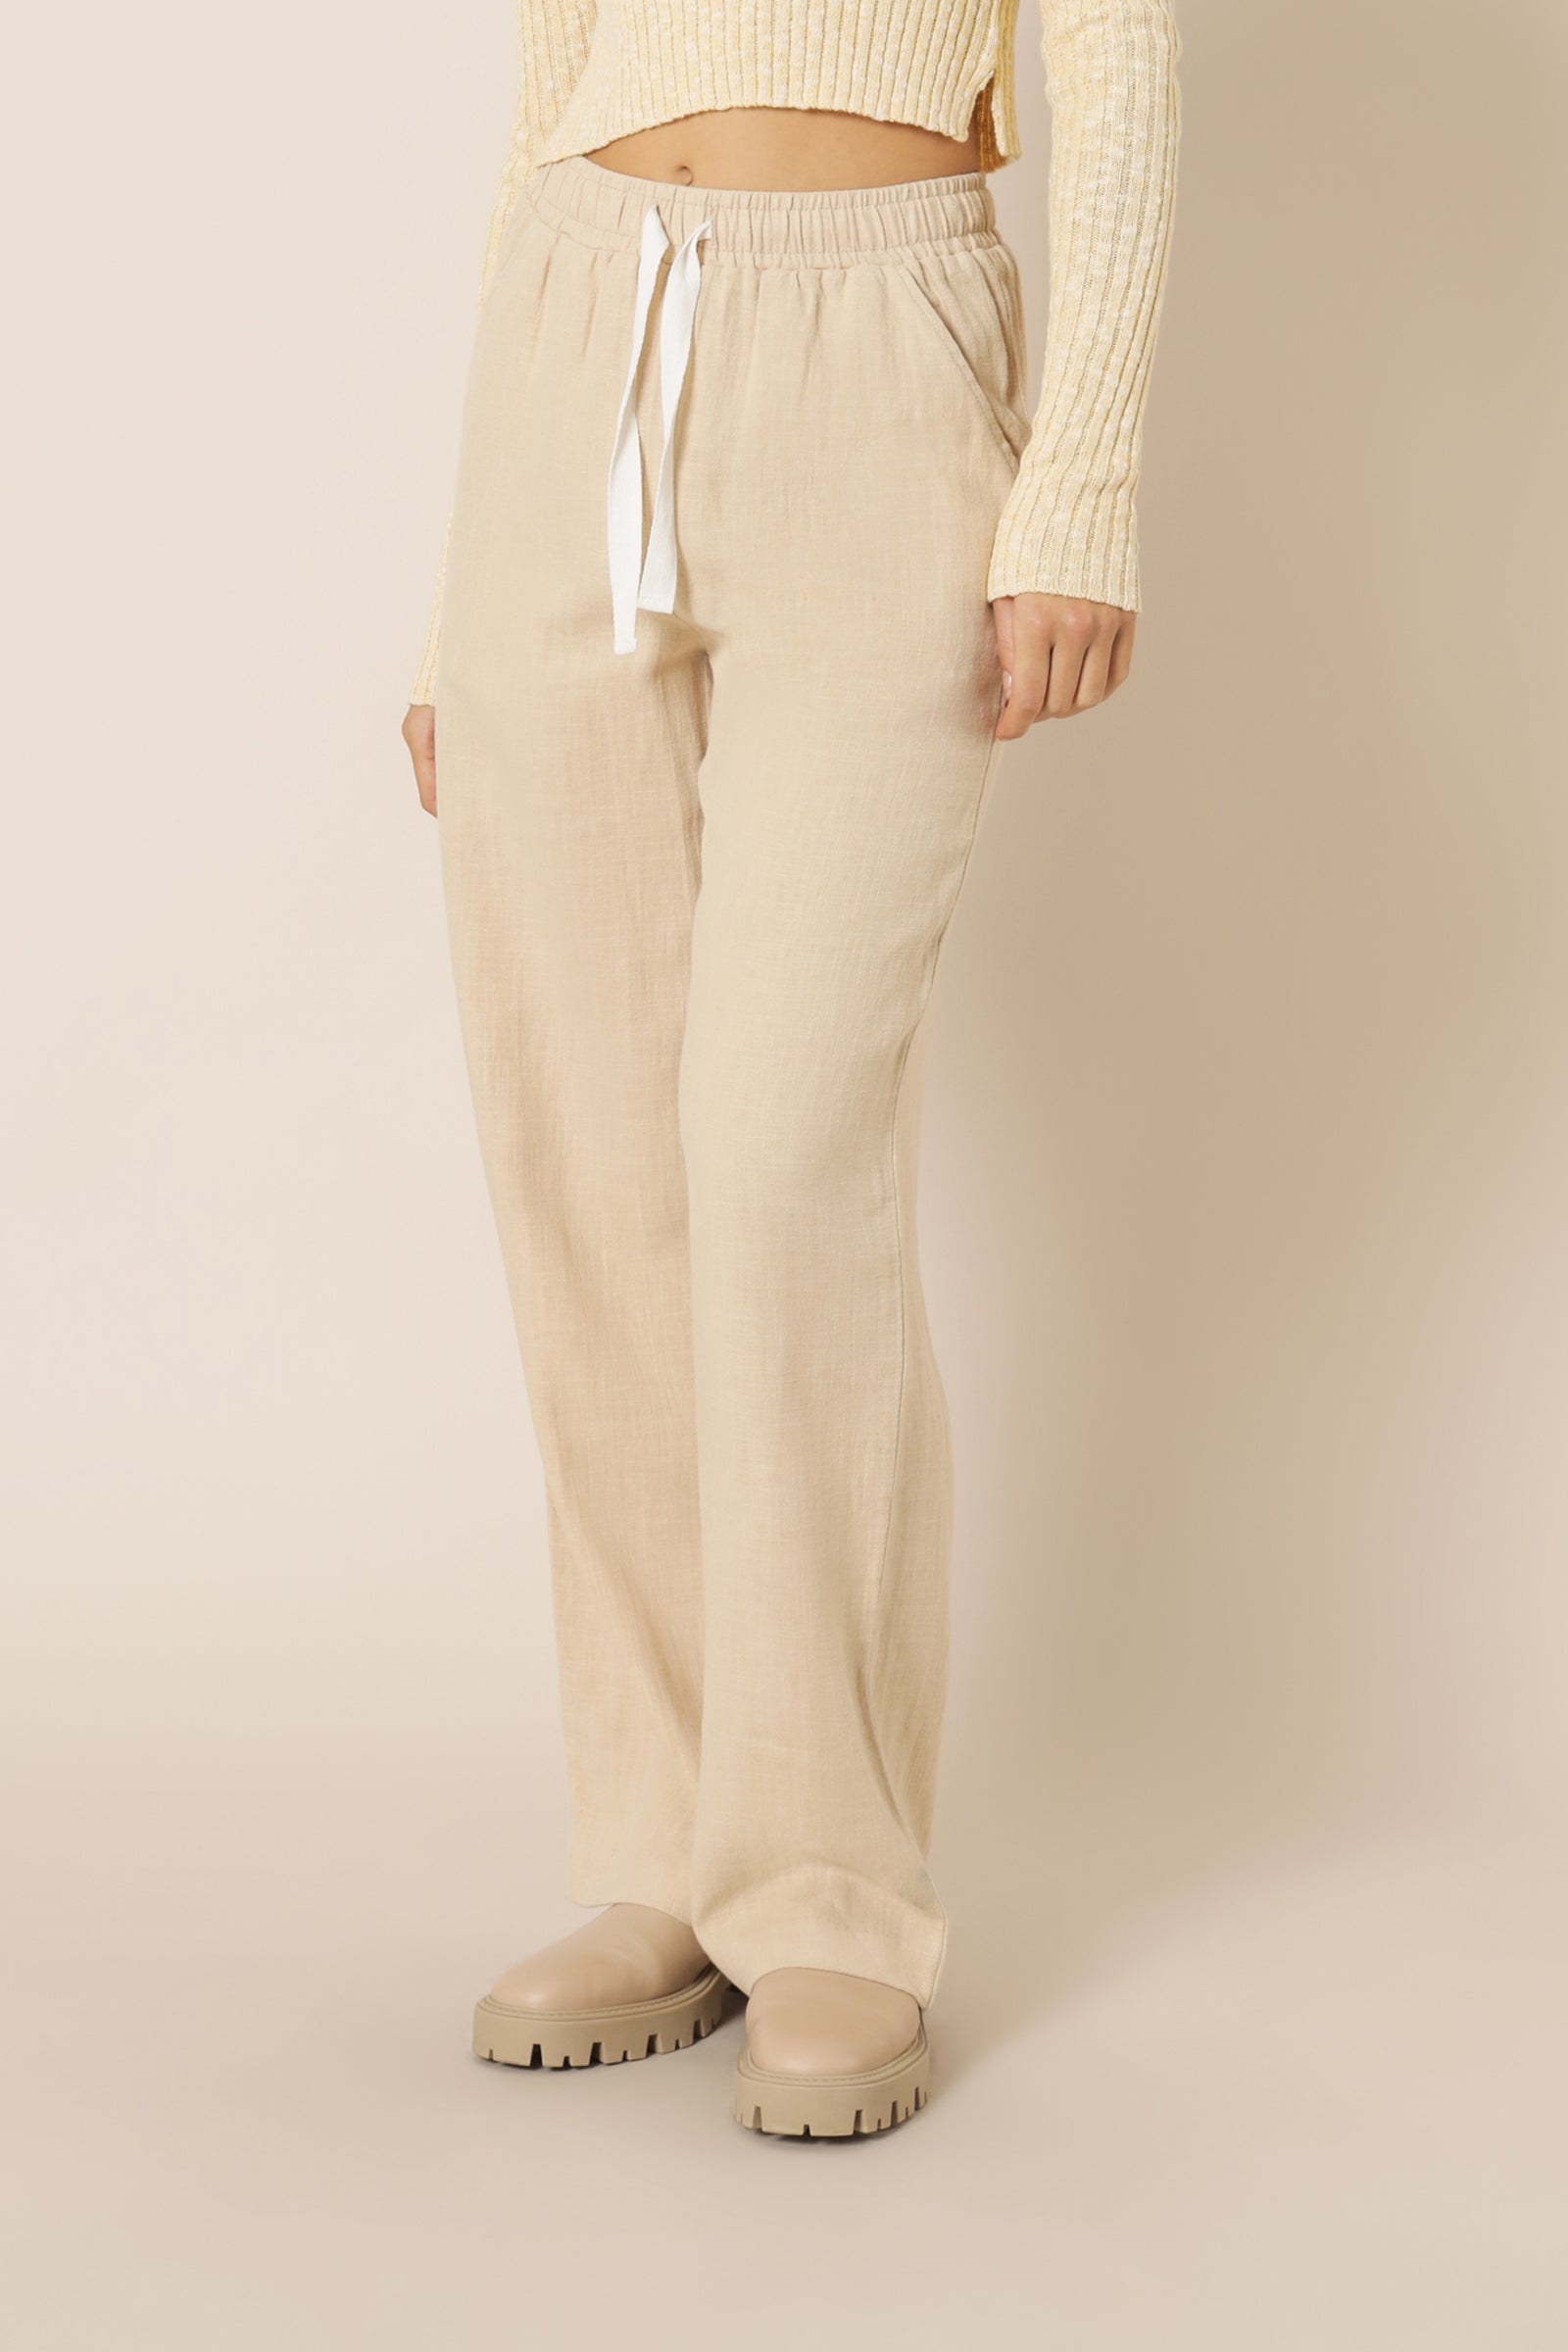 Nude Lucy marvin wide leg pant oat pants